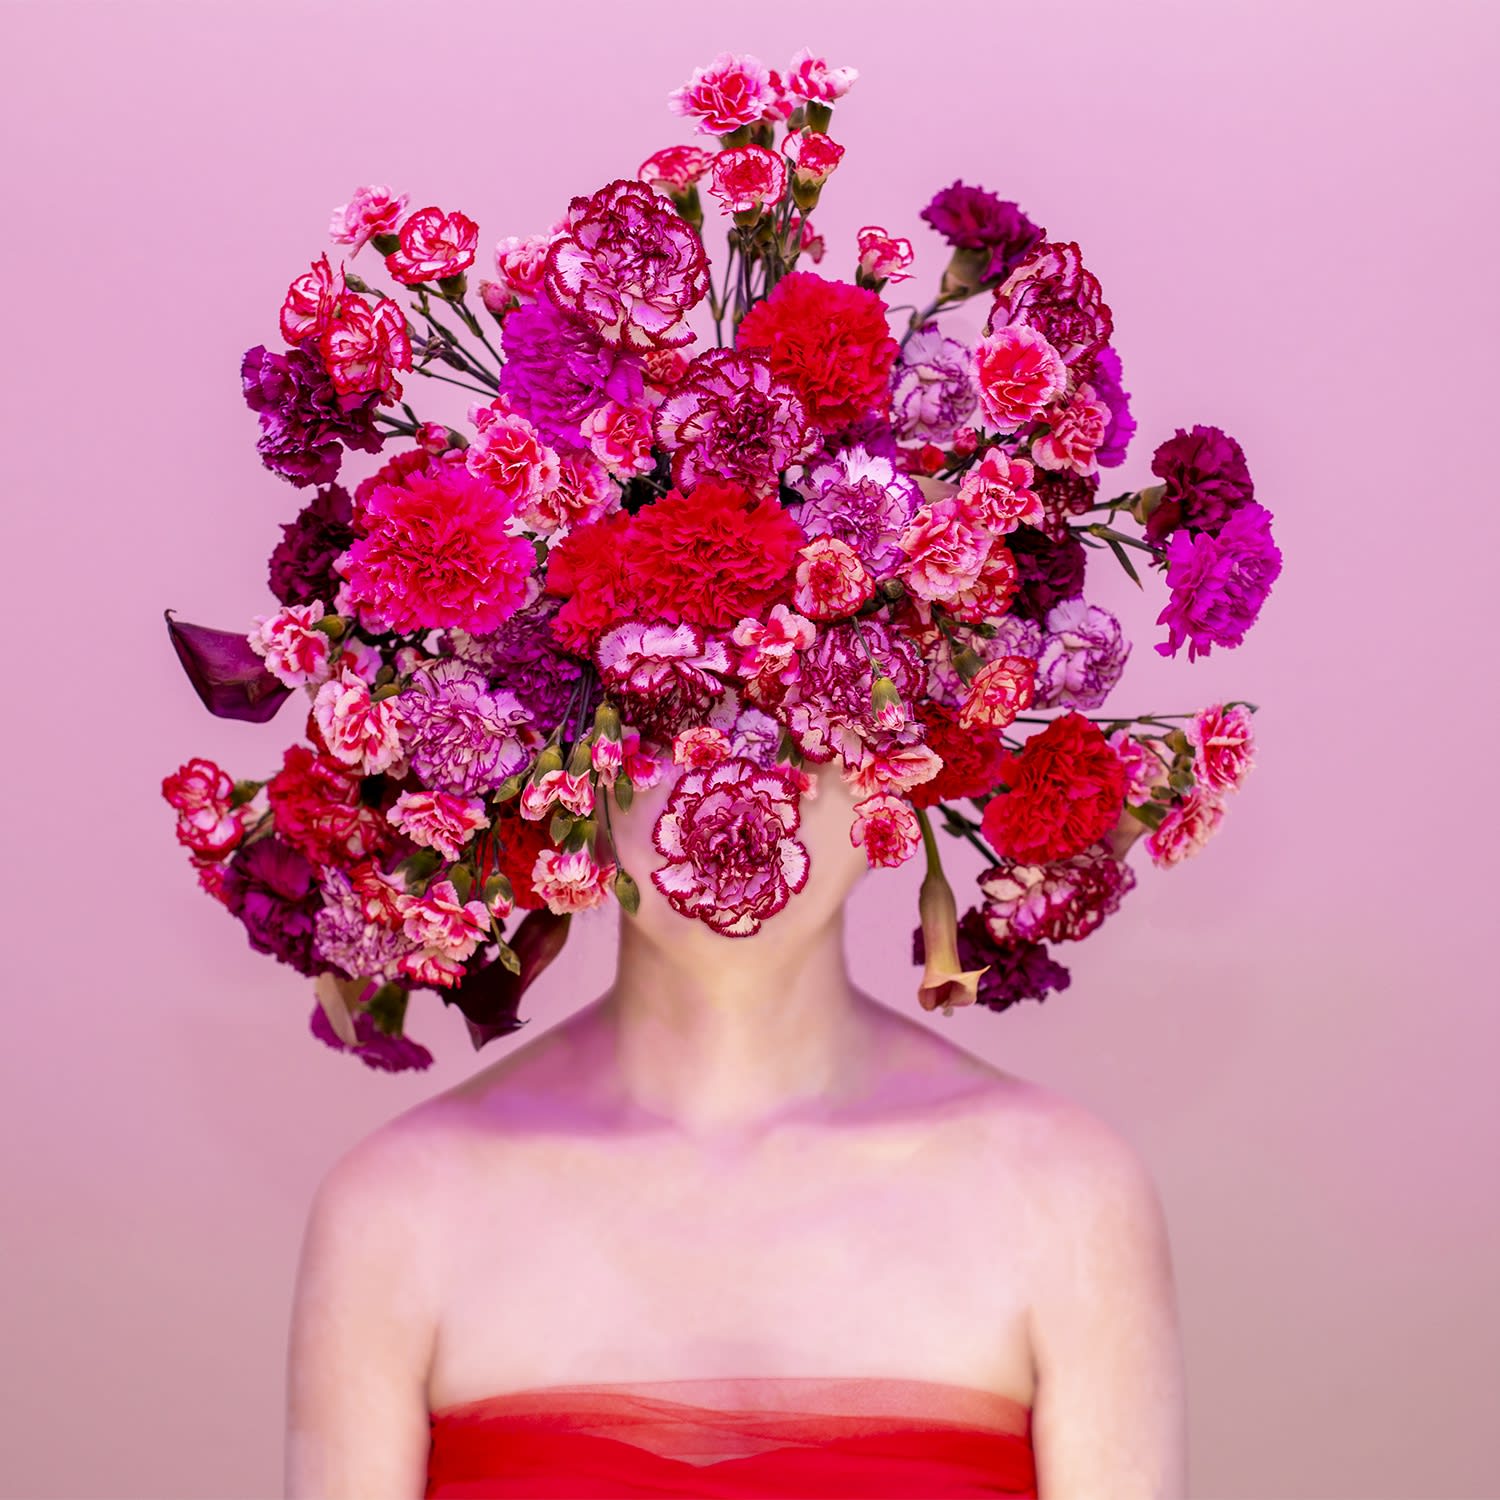 Photograph of woman in pink, face covered in pink and red flowers